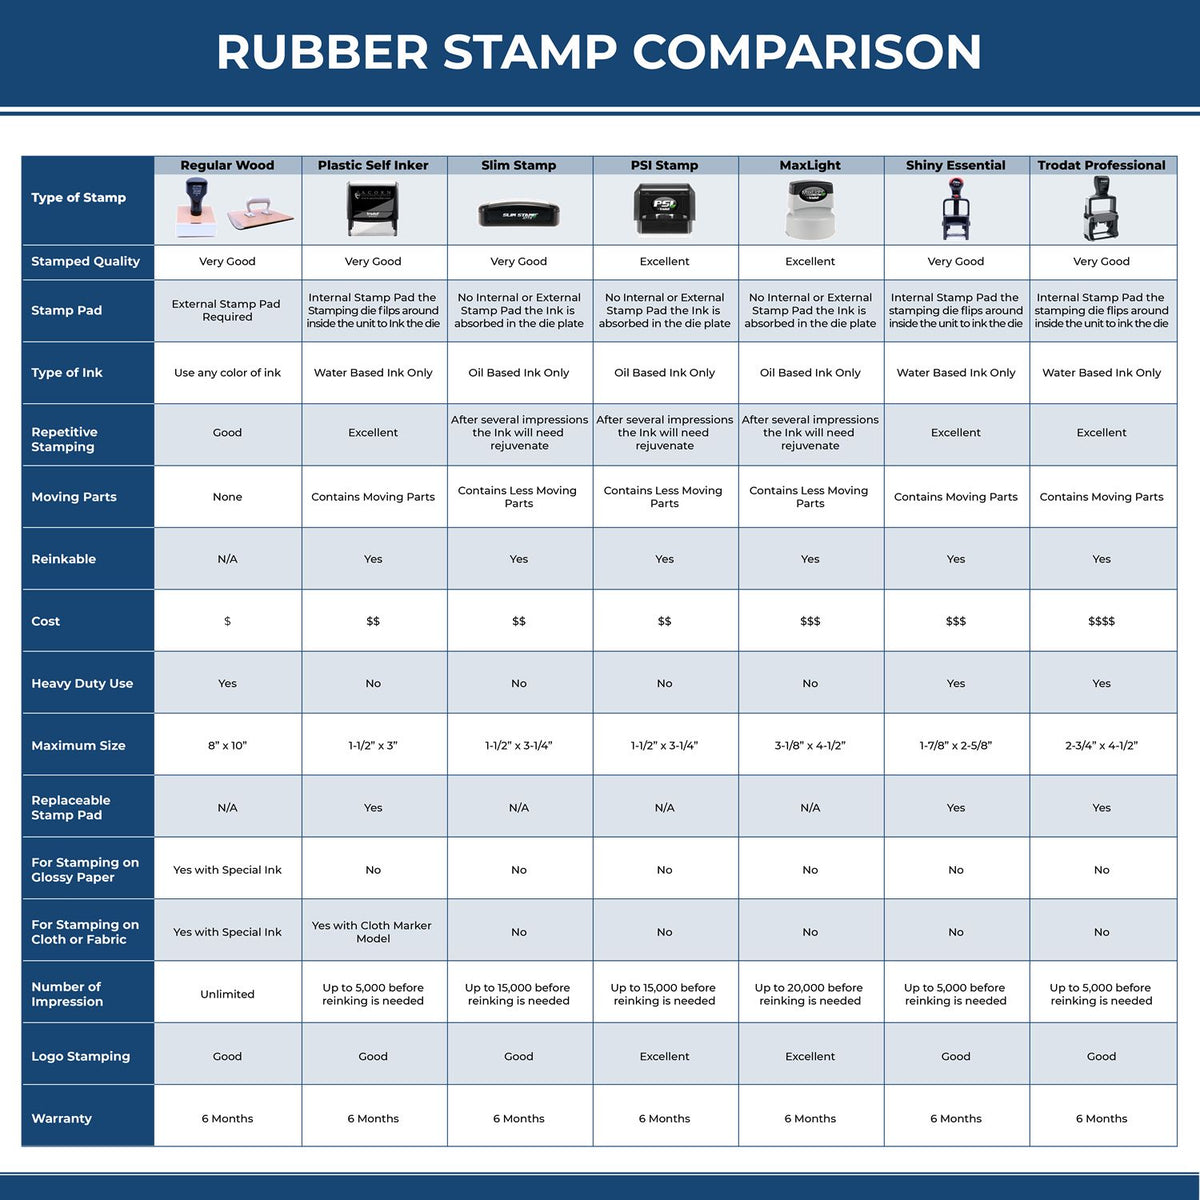 A comparison chart for the different types of mount models available for the Self-Inking Alaska PE Stamp.